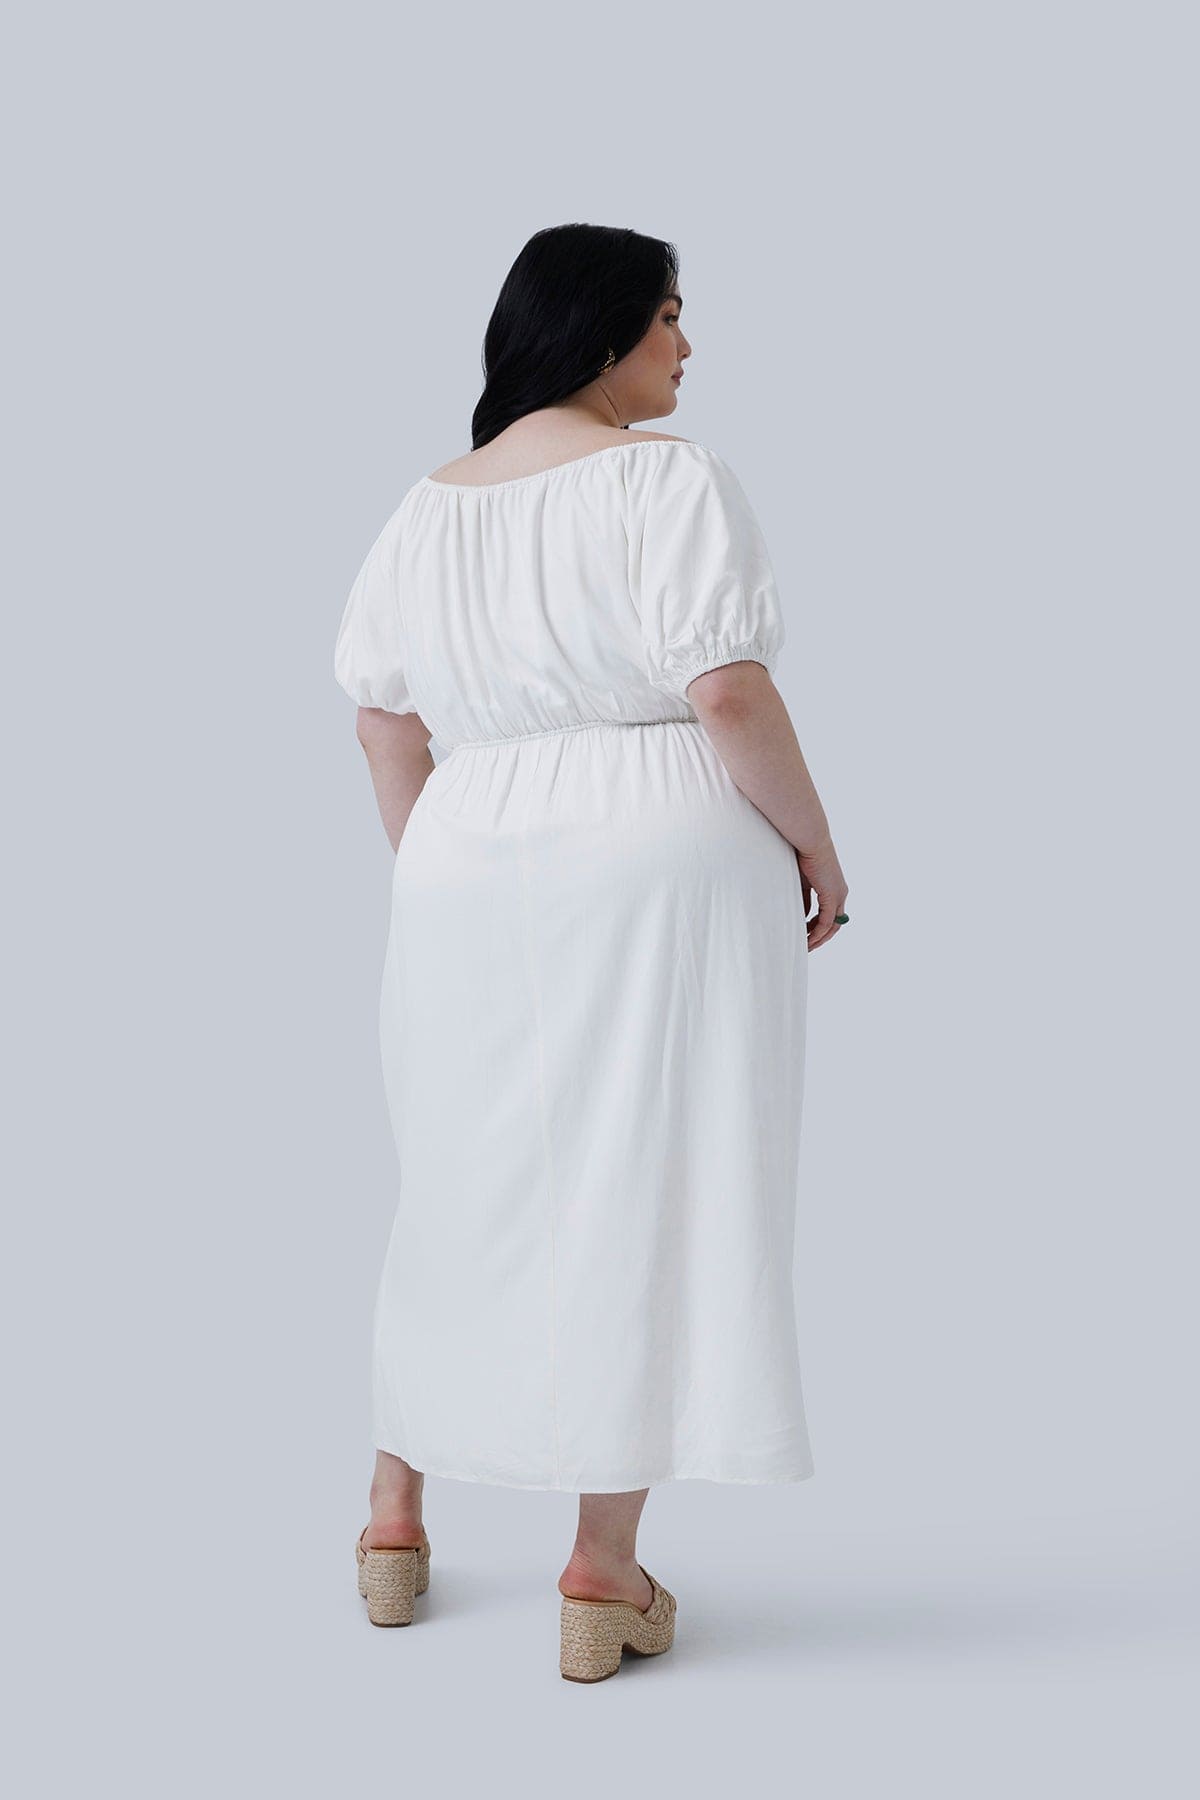 Back view of the Gia Midi Dress size 3X. This plus size travel dress for women is available in size 12-26. This is the perfect length for a dress. Shop Gia IRL Plus Size boutique.